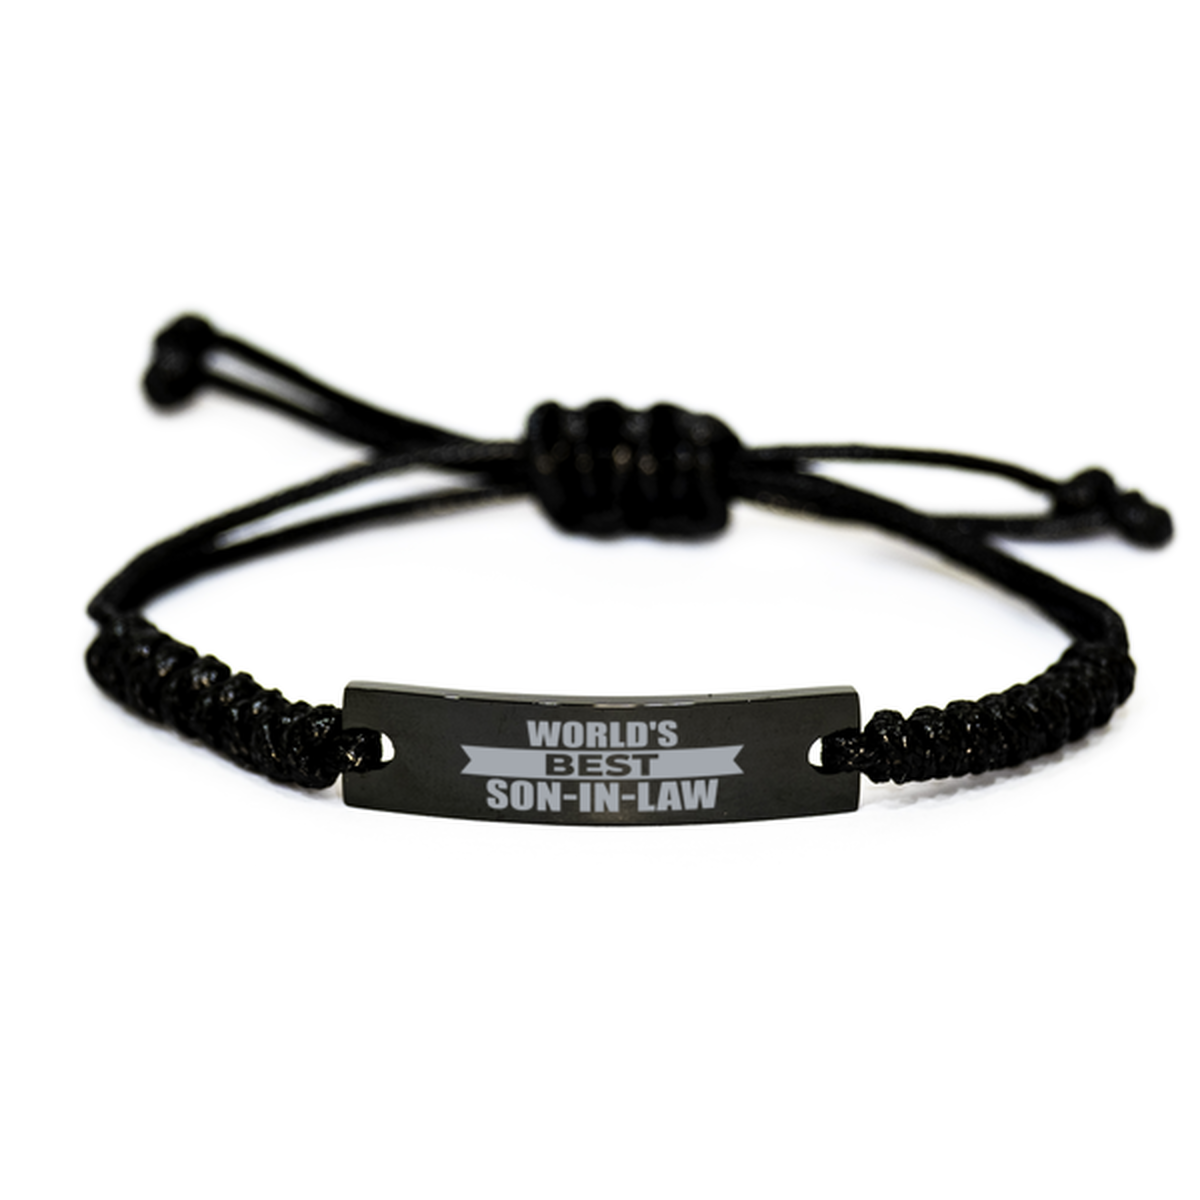 World's Best Son-in-law Gifts, Funny Engraved Rope Bracelet For Son-in-law, Birthday Family Gifts For Men